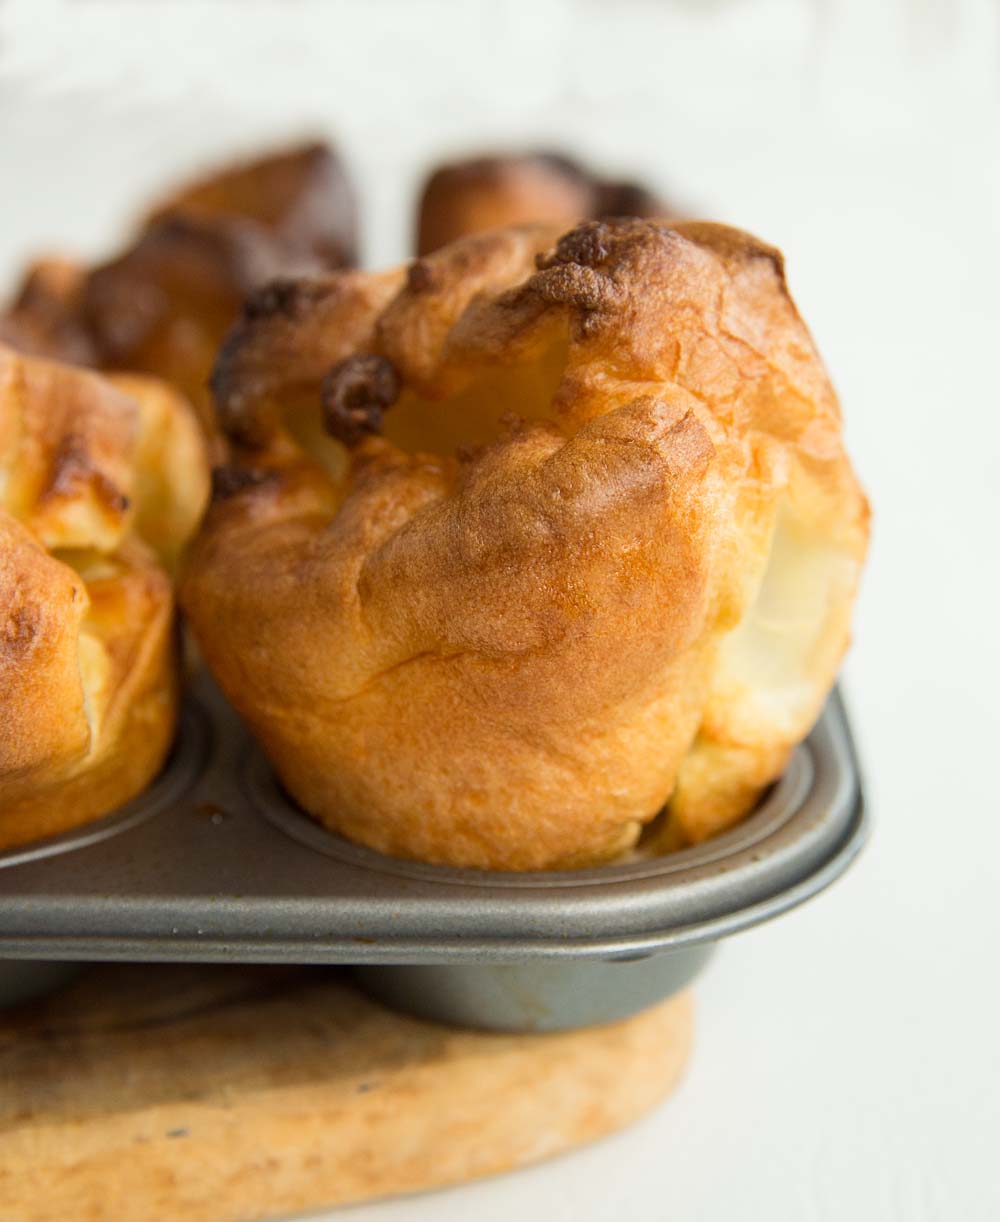 The 7 Best Yorkshire Pudding Tins Of 2023 - Foods Guy